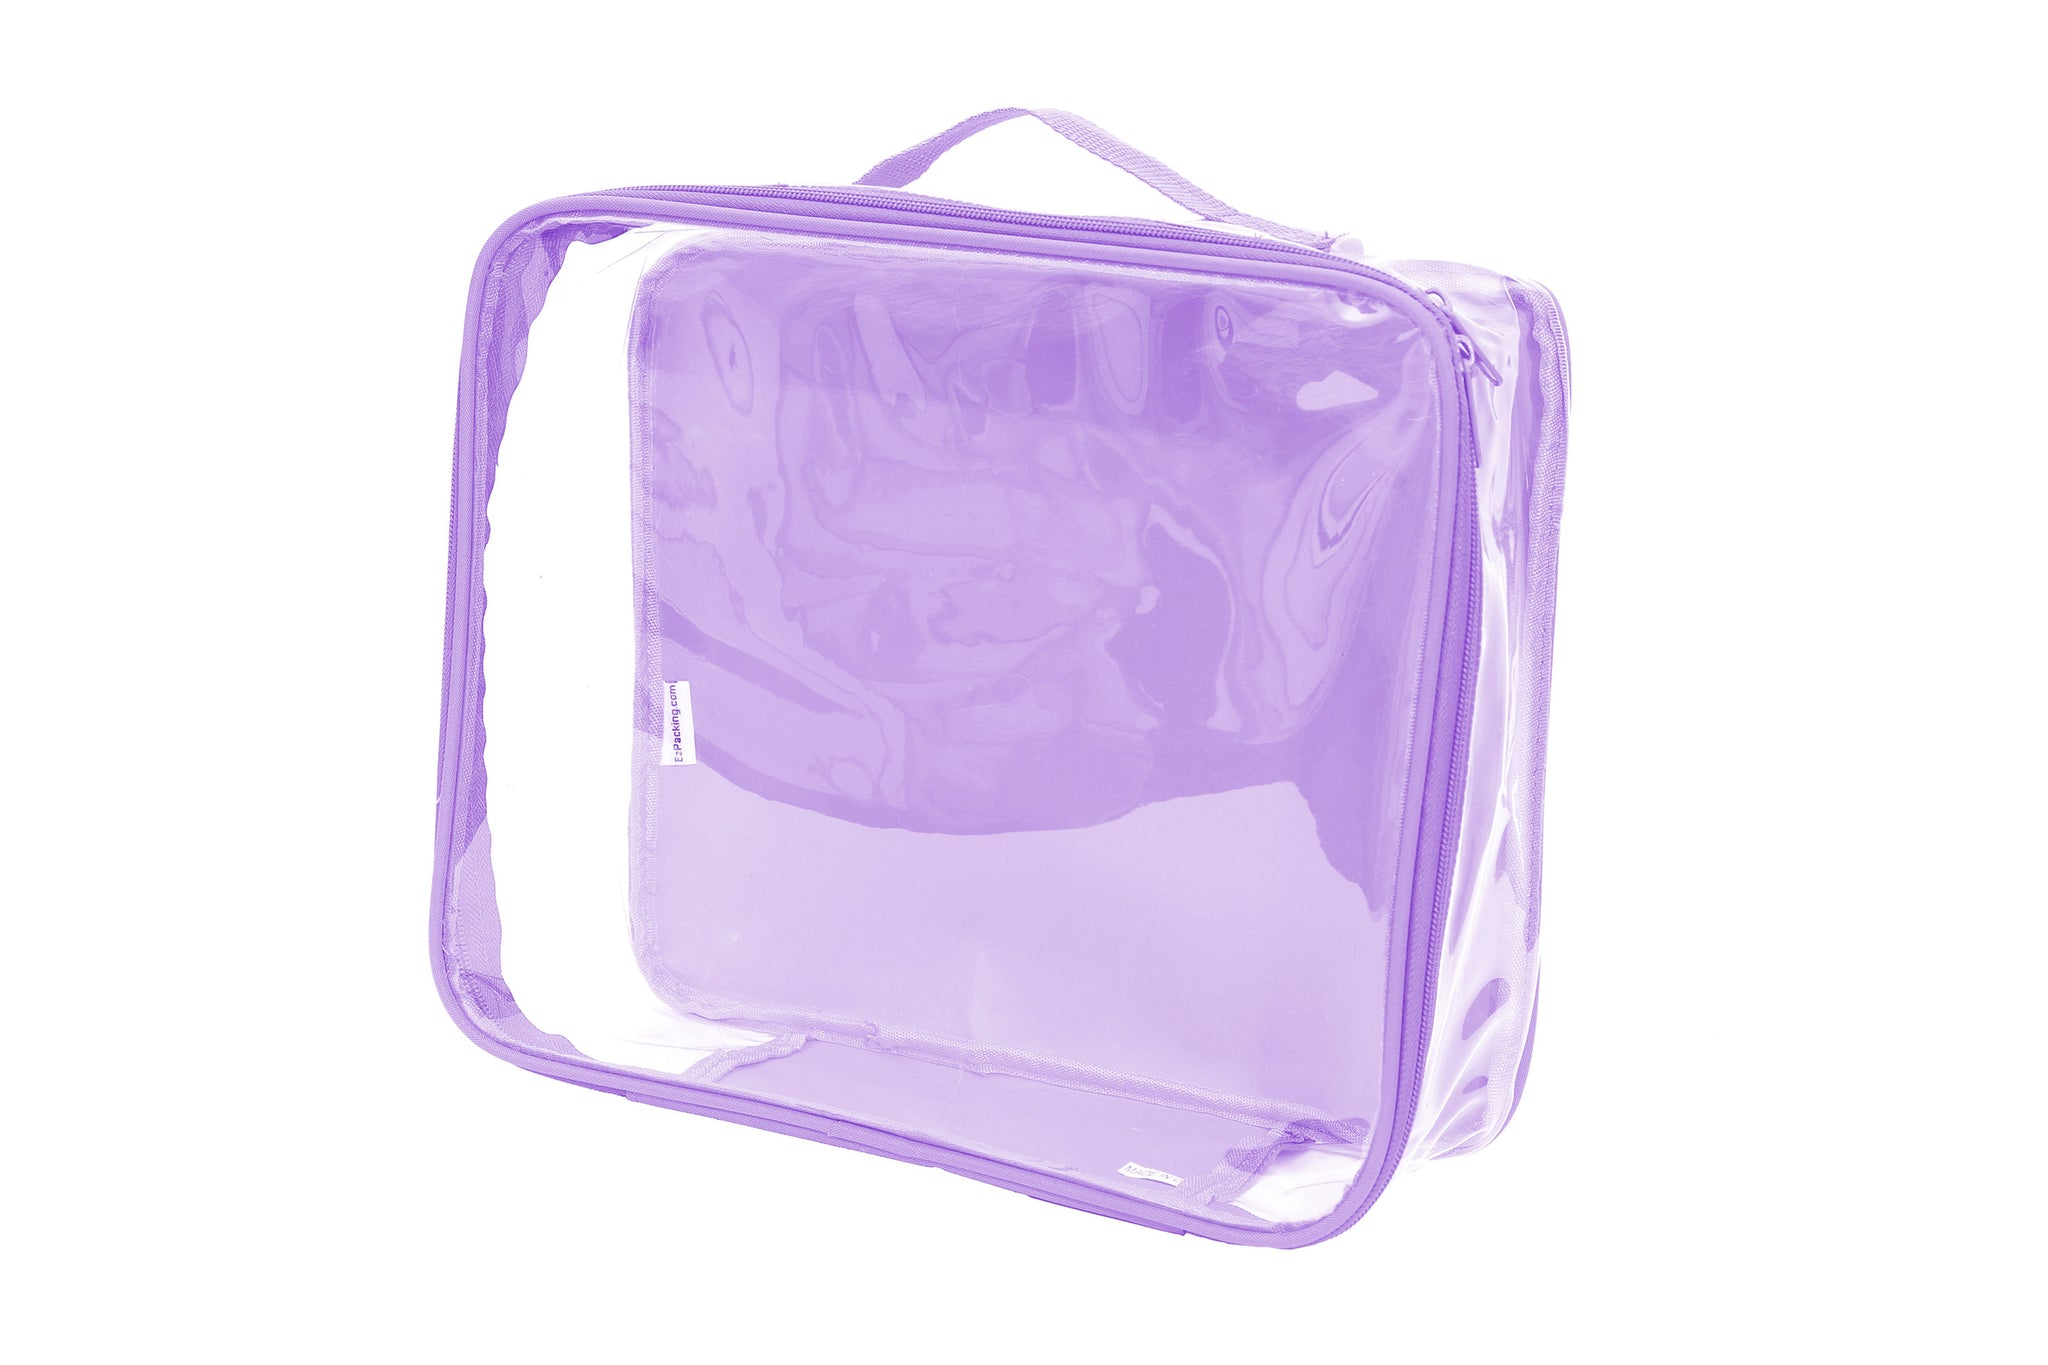 EzPacking Medium Clear Travel Packing Cube/See-Through Clothes Organizer for Suitcase